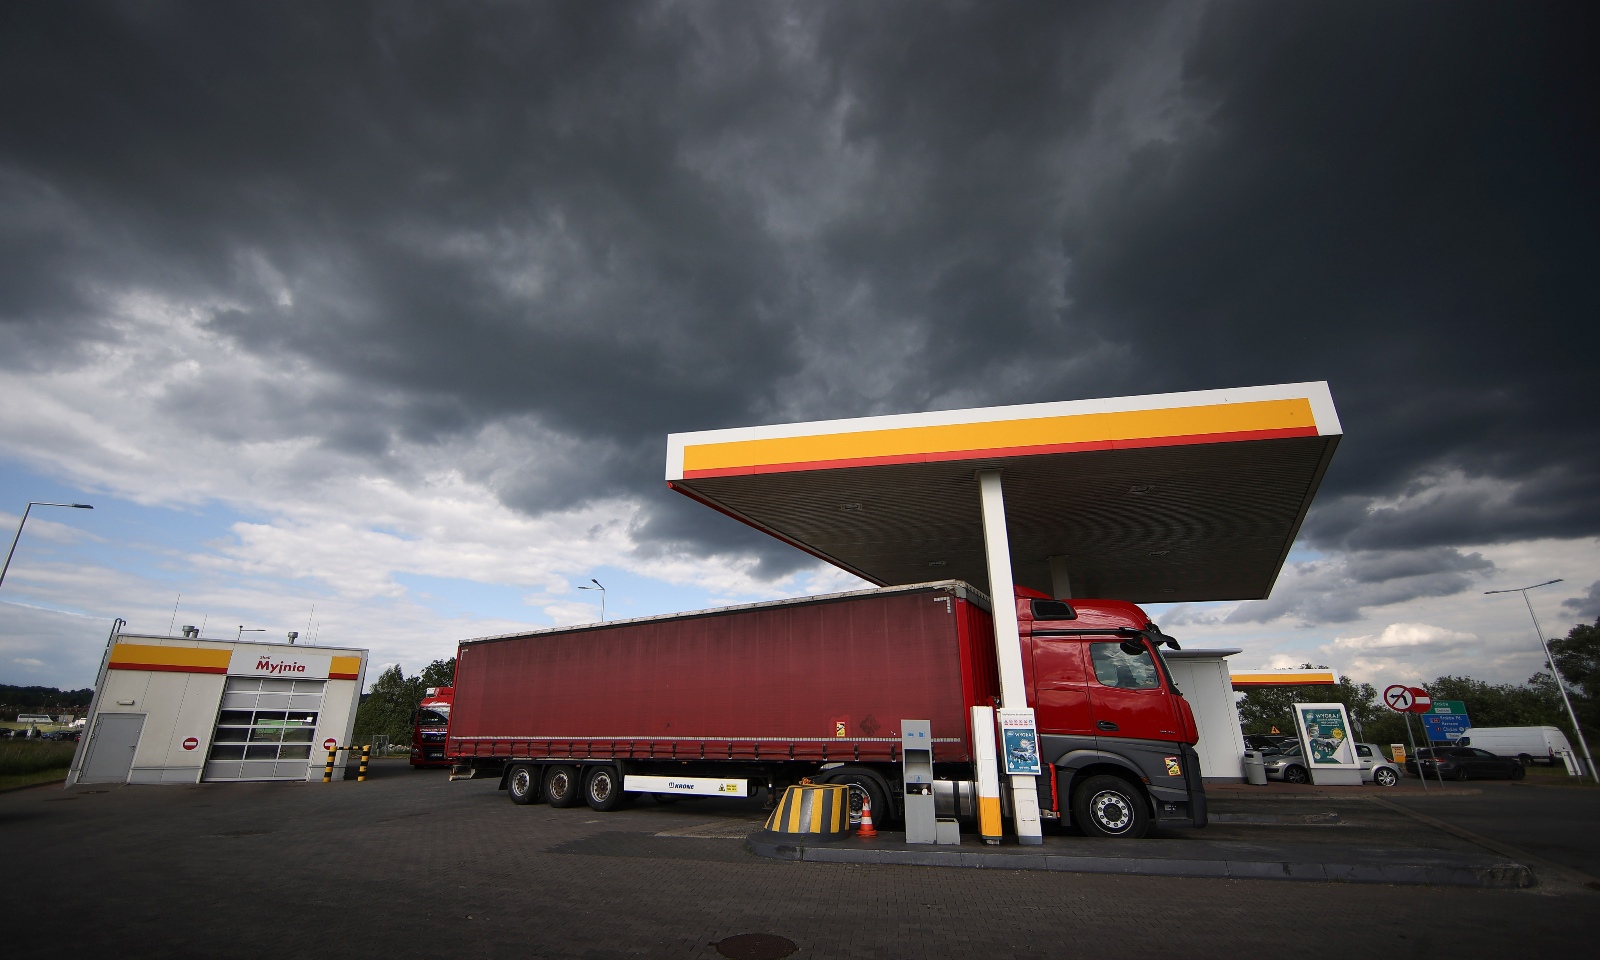 A truck parked at a Shell gas station under a dark, stormy sky.